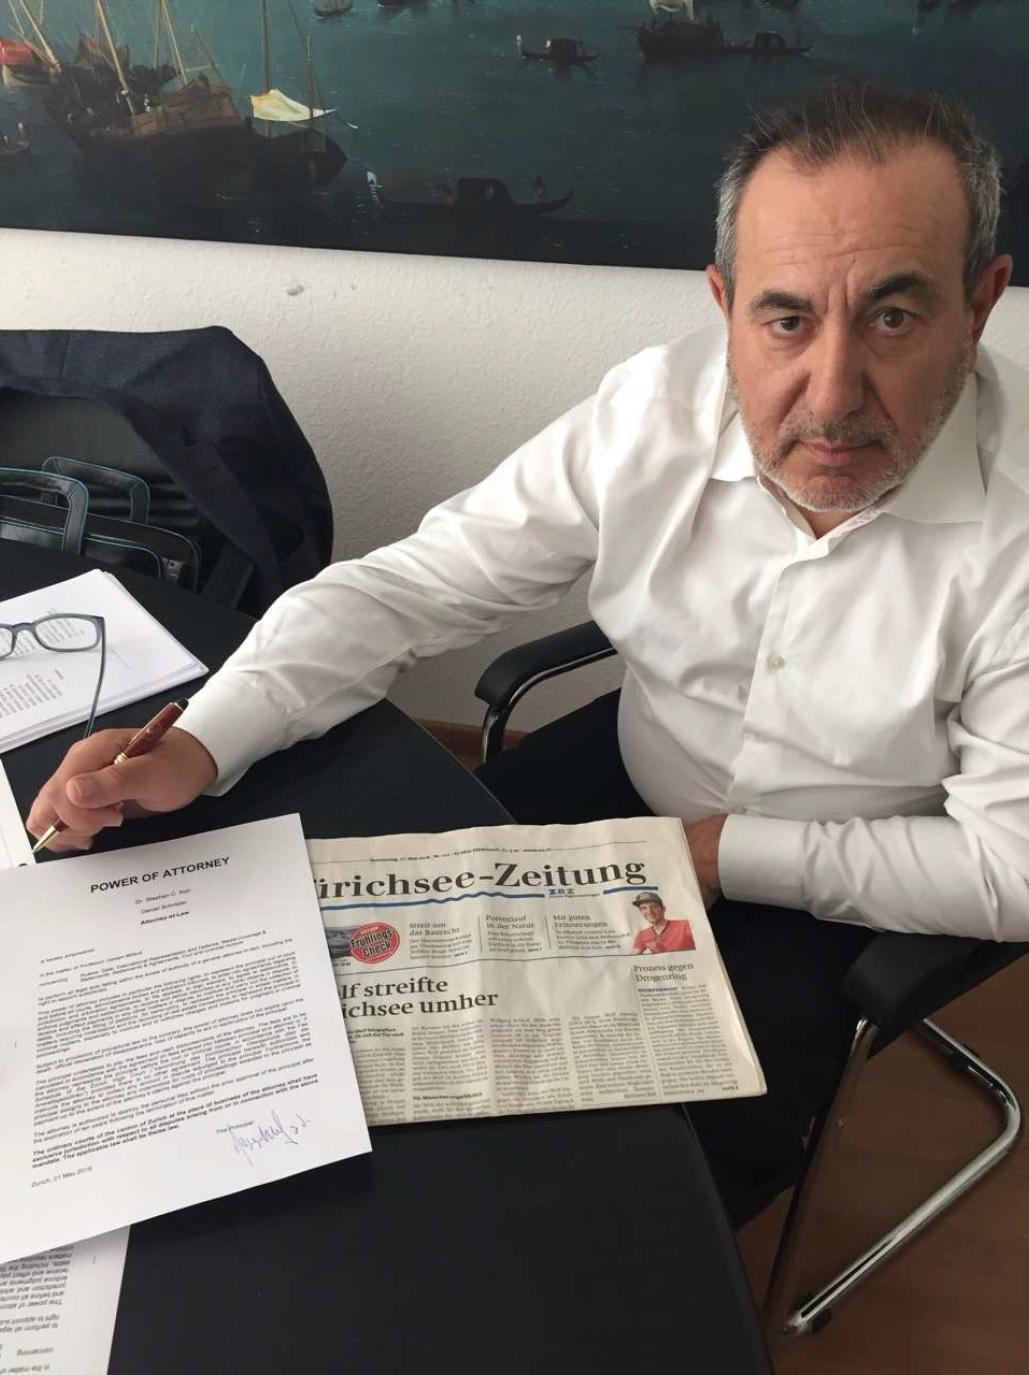 Joseph Mifsud in Zurich, Switzerland, in May 2018. The photo shows a signed power of attorney document dated May 21, 2018. (Courtesy of Stephan Roh)